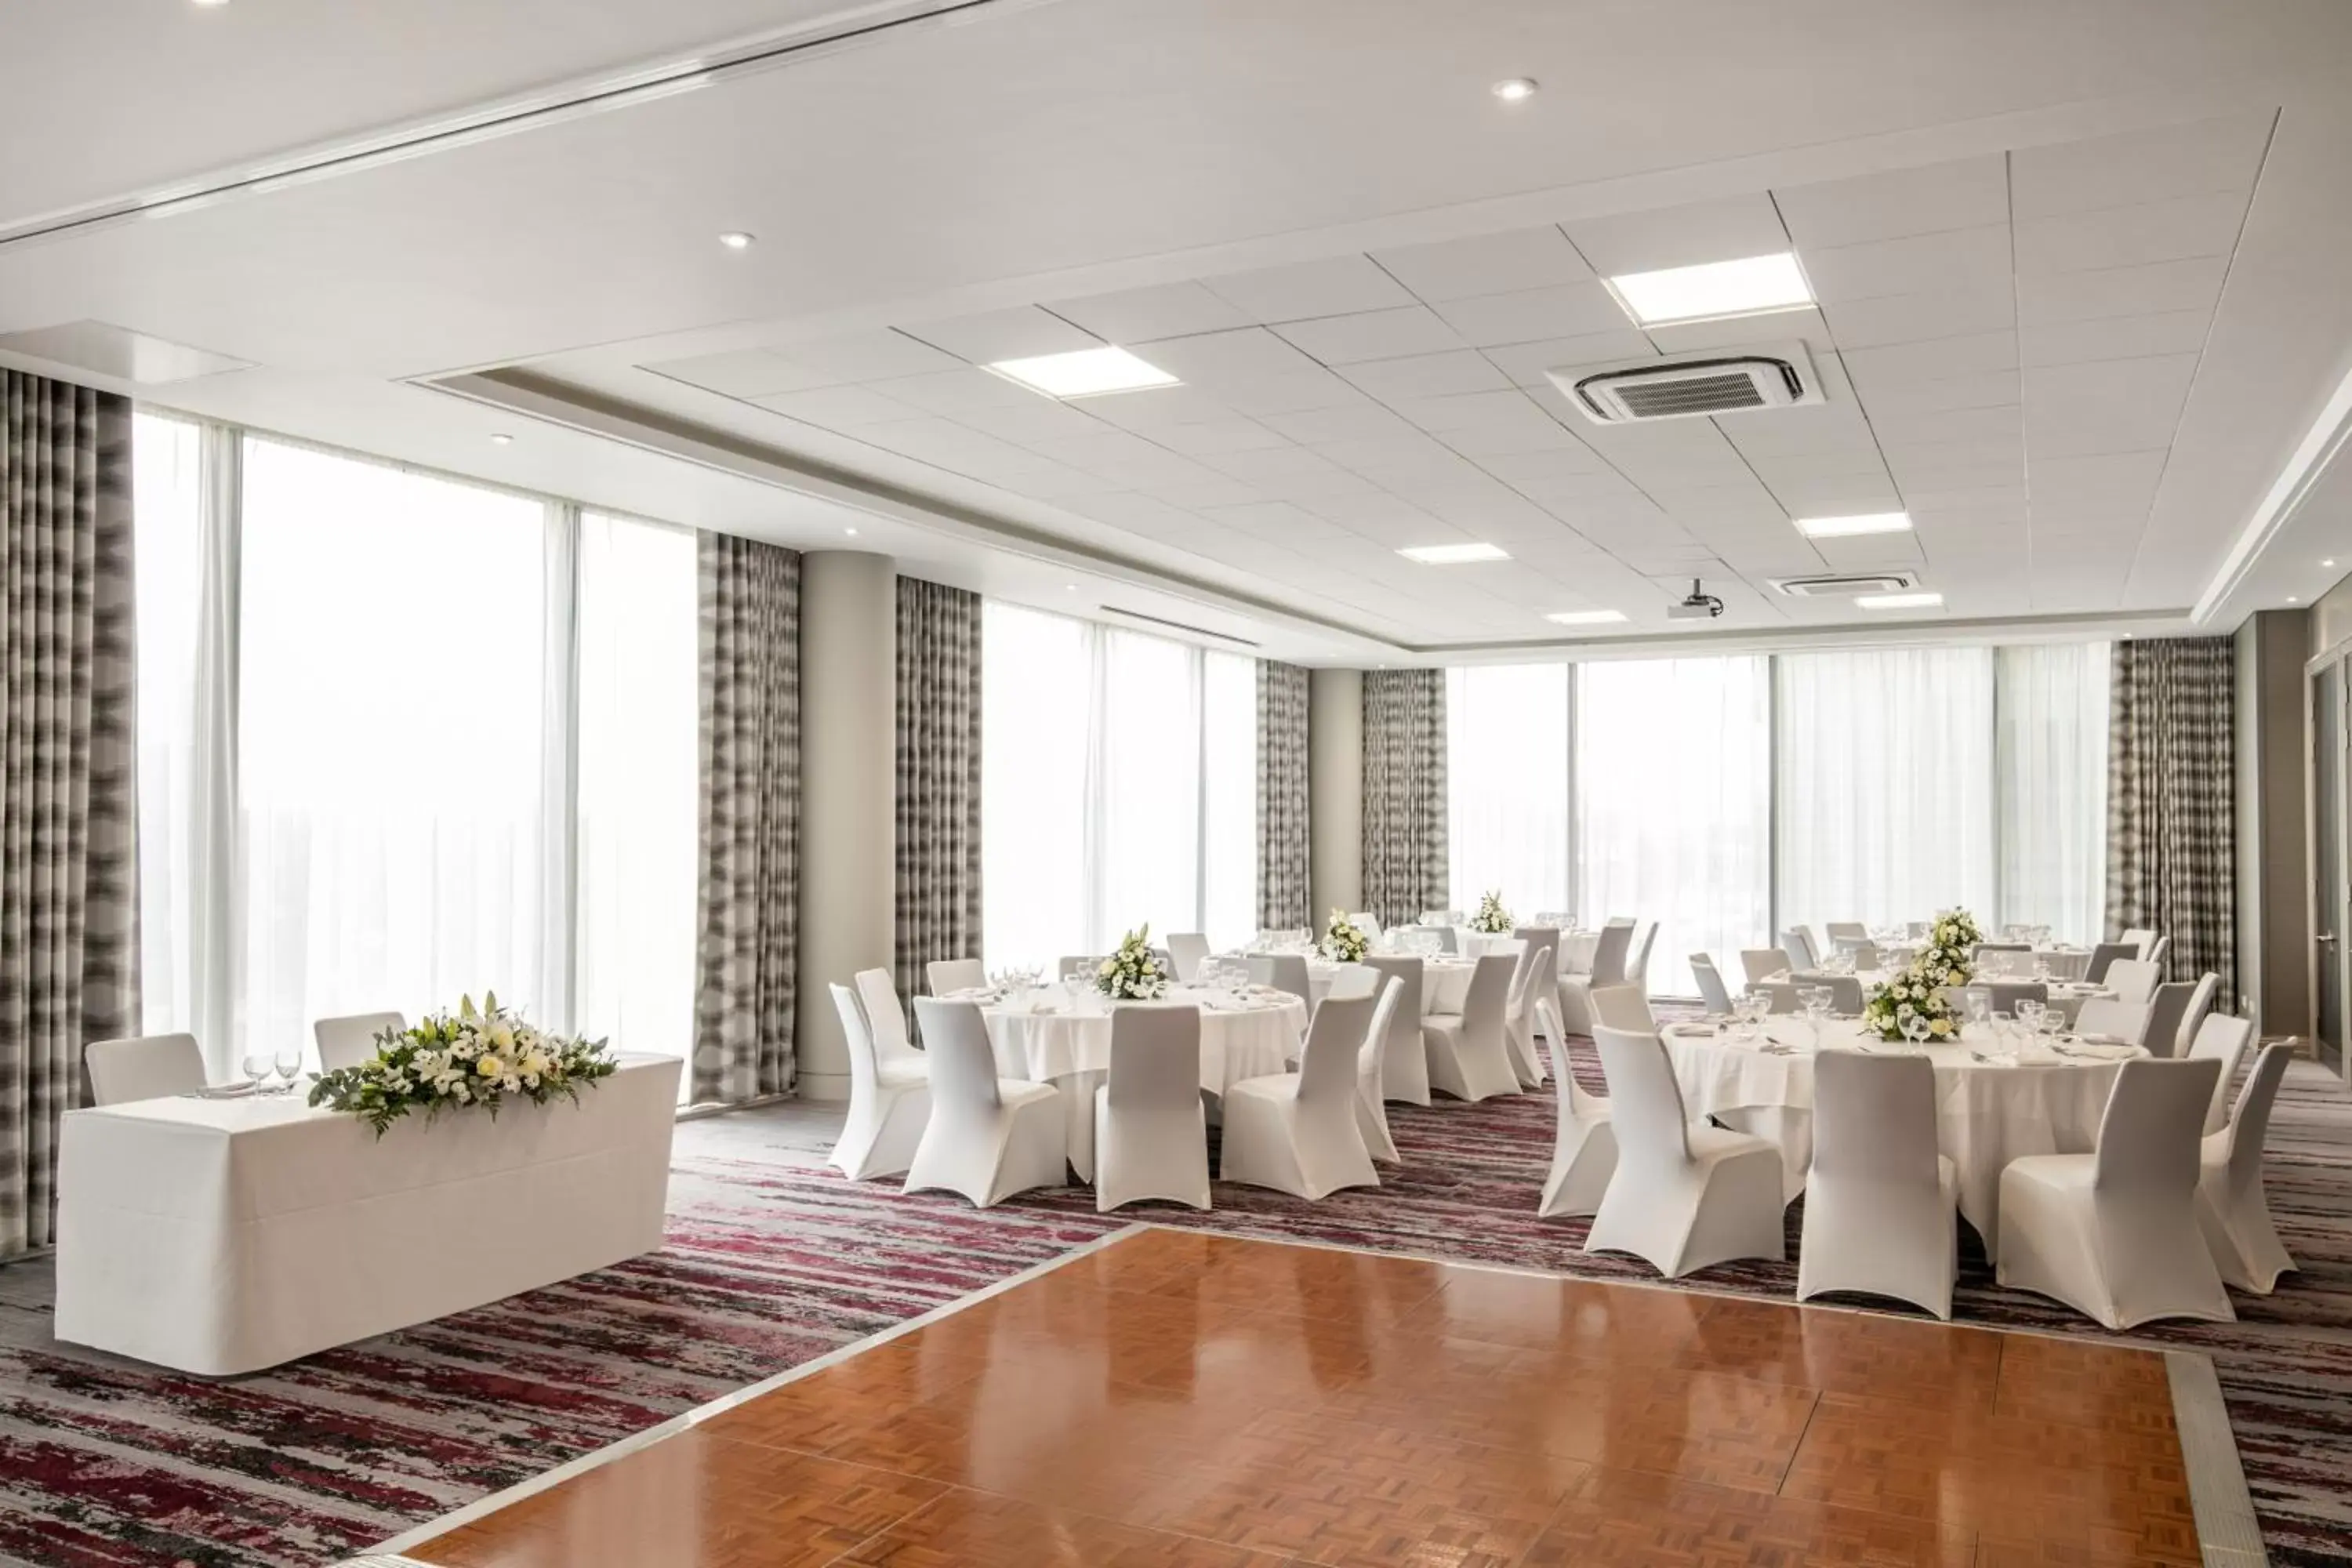 Banquet/Function facilities, Banquet Facilities in Crowne Plaza London - Docklands, an IHG Hotel